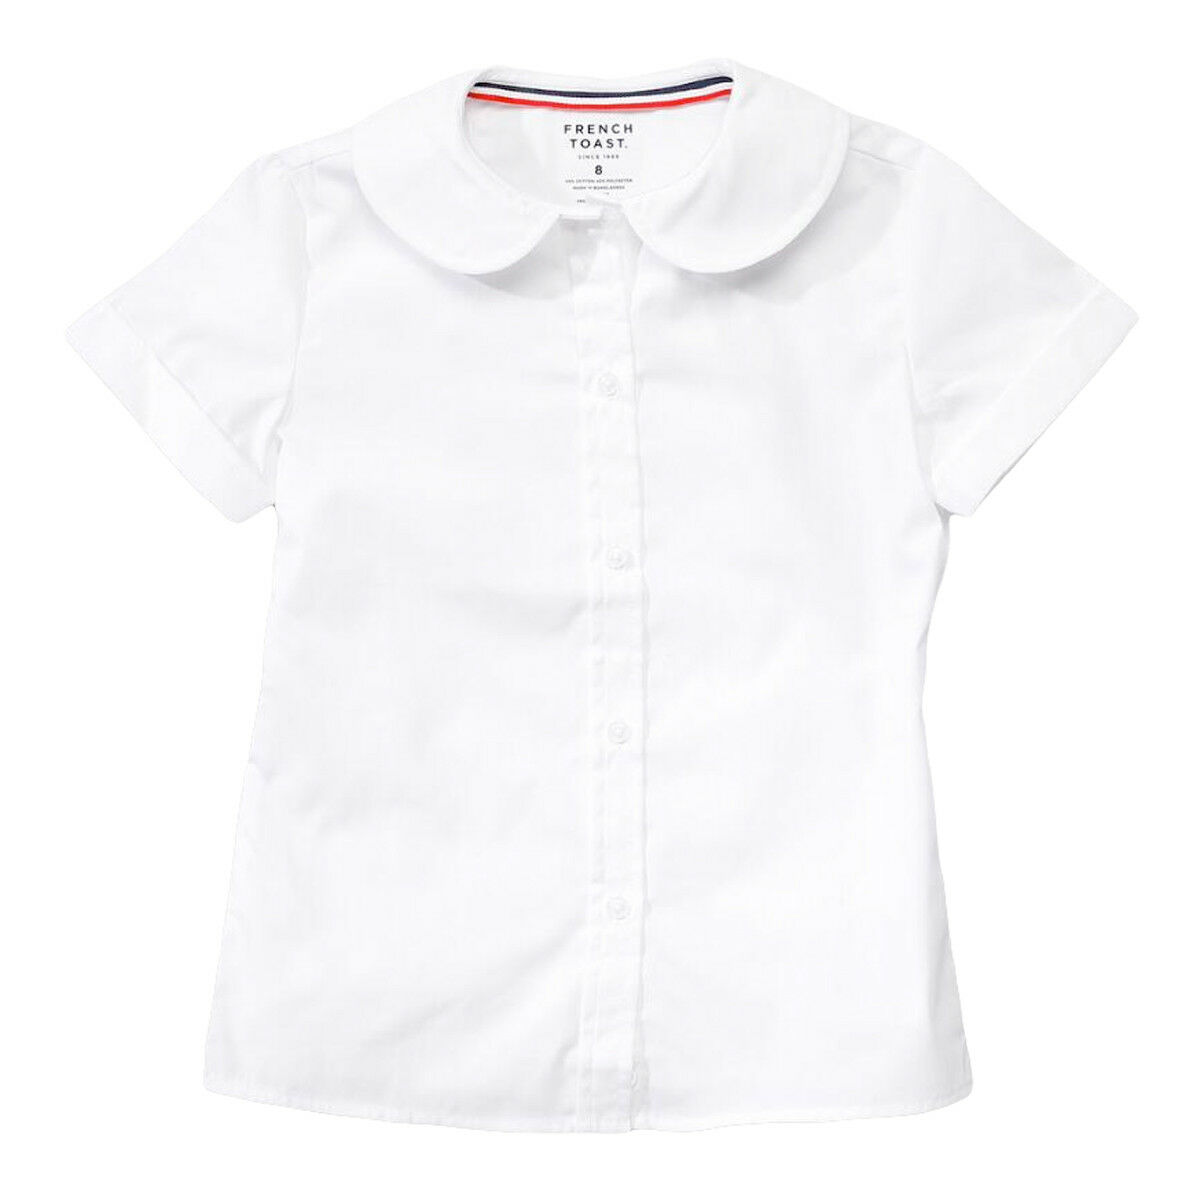 Toddler Girls White Blouse Peter Pan Collar French Toast School Uniform 2t To 4t